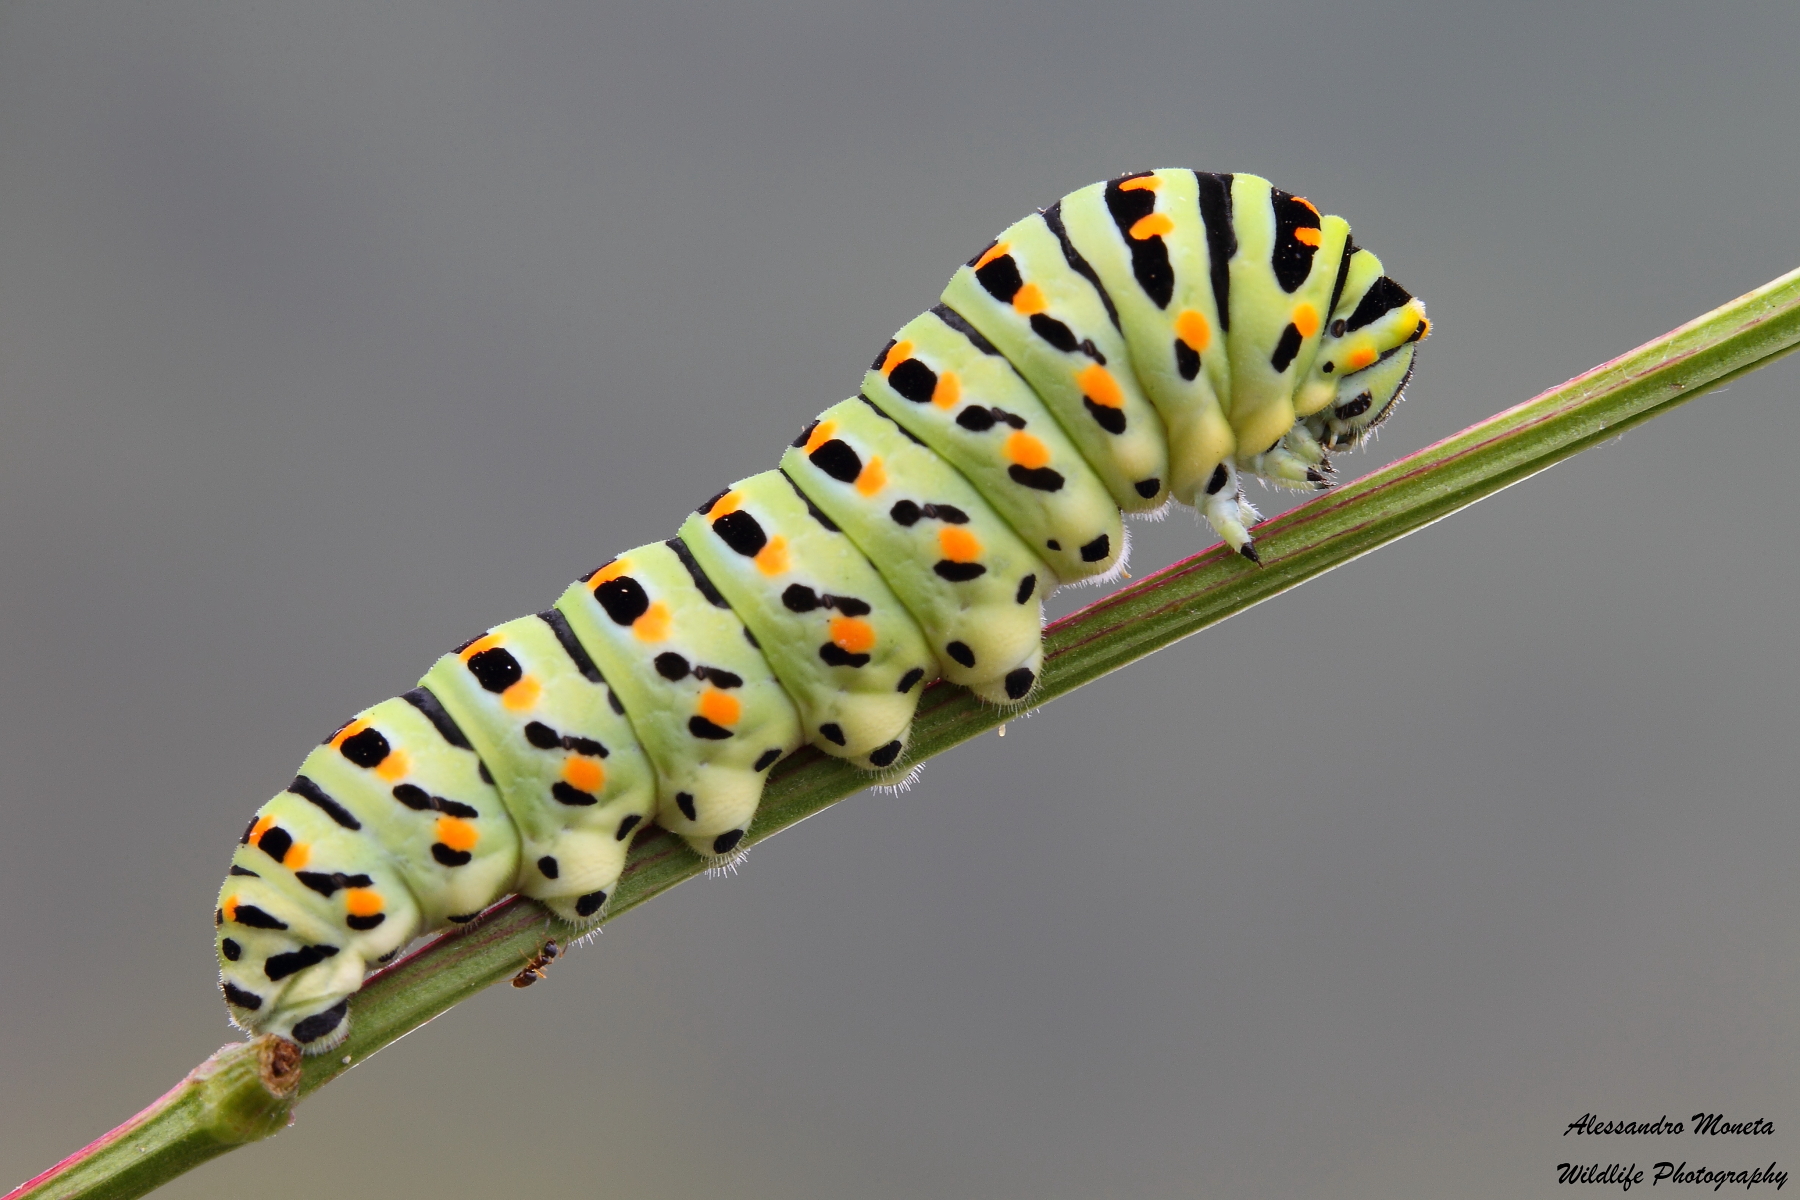 Swallowtail caterpillar with small guest...